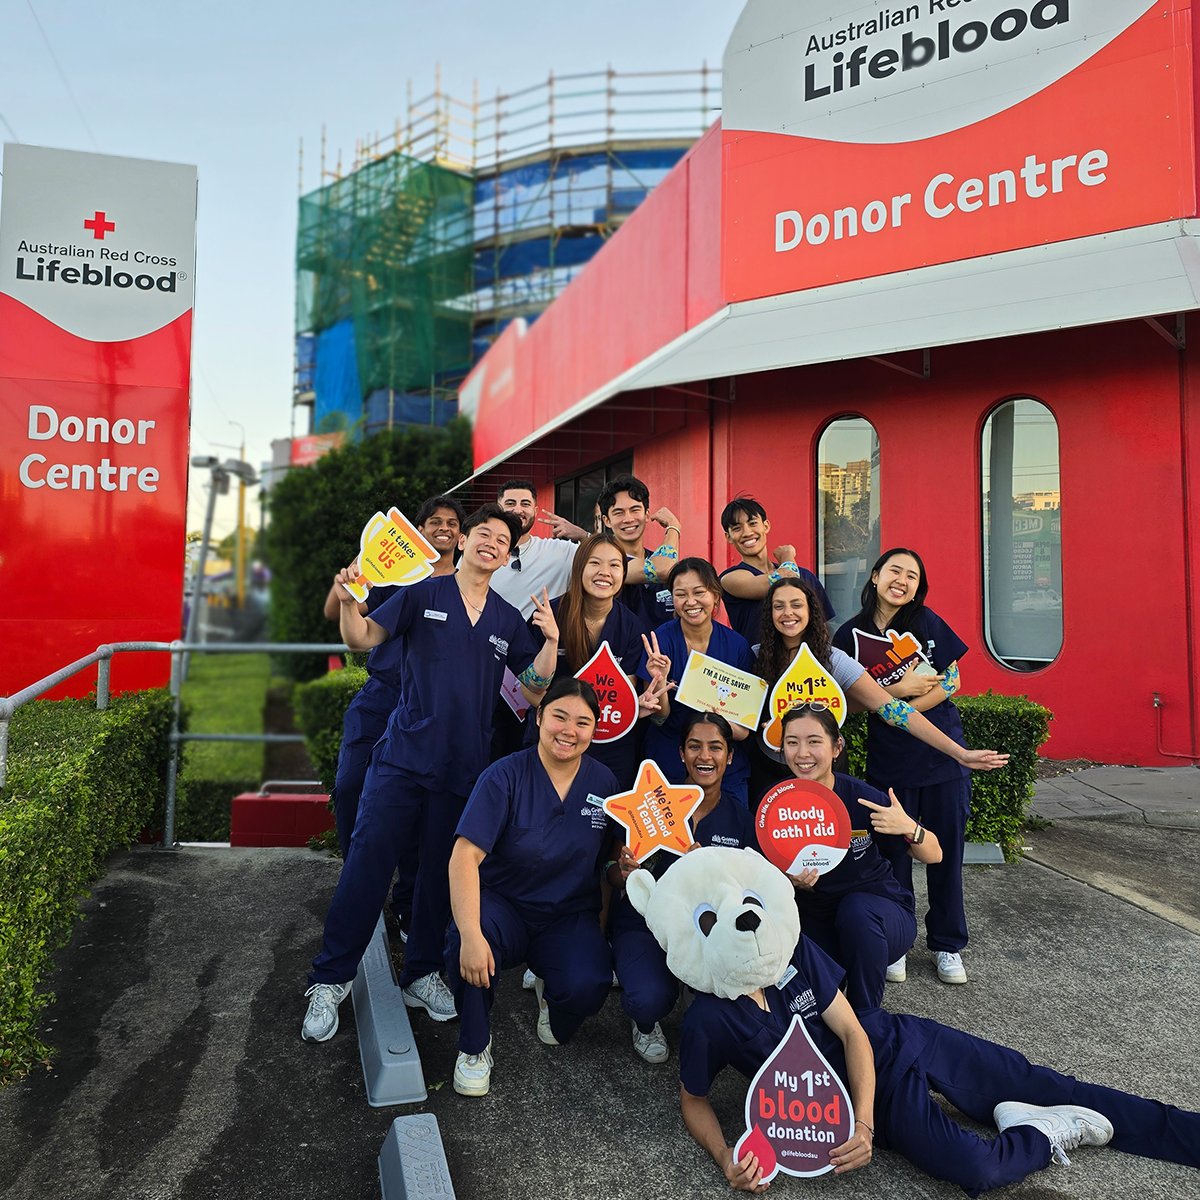 What happens when you give @griffithuniversity students a challenge? They save up to 30 lives as a #lifebloodau Team. With the Tertiary Blood Drive well underway, we can't wait to see the impact tertiary teams make across the country!